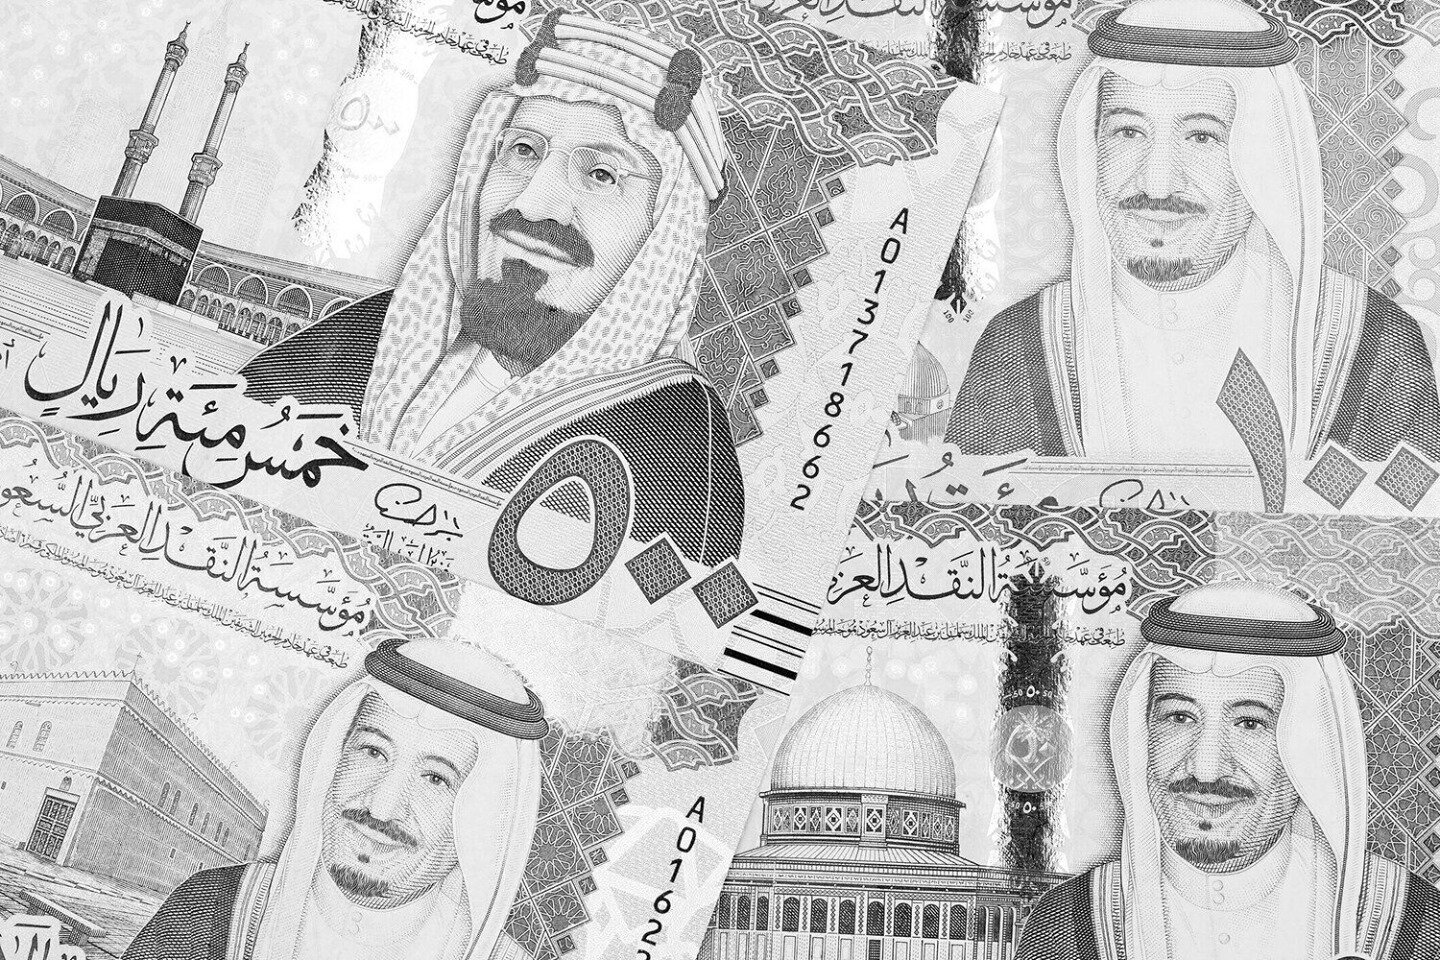 https://buff.ly/3upGgIH⠀
SAUDI ARABIA SEEKS TO DRAW IN FOREIGN COMPANIES⠀
#businessmanagement #strategy #global #consulting #talent #professionalservices #careers #consultingcareers #strategycareers #digitalcareers  #advisory #credentials #management